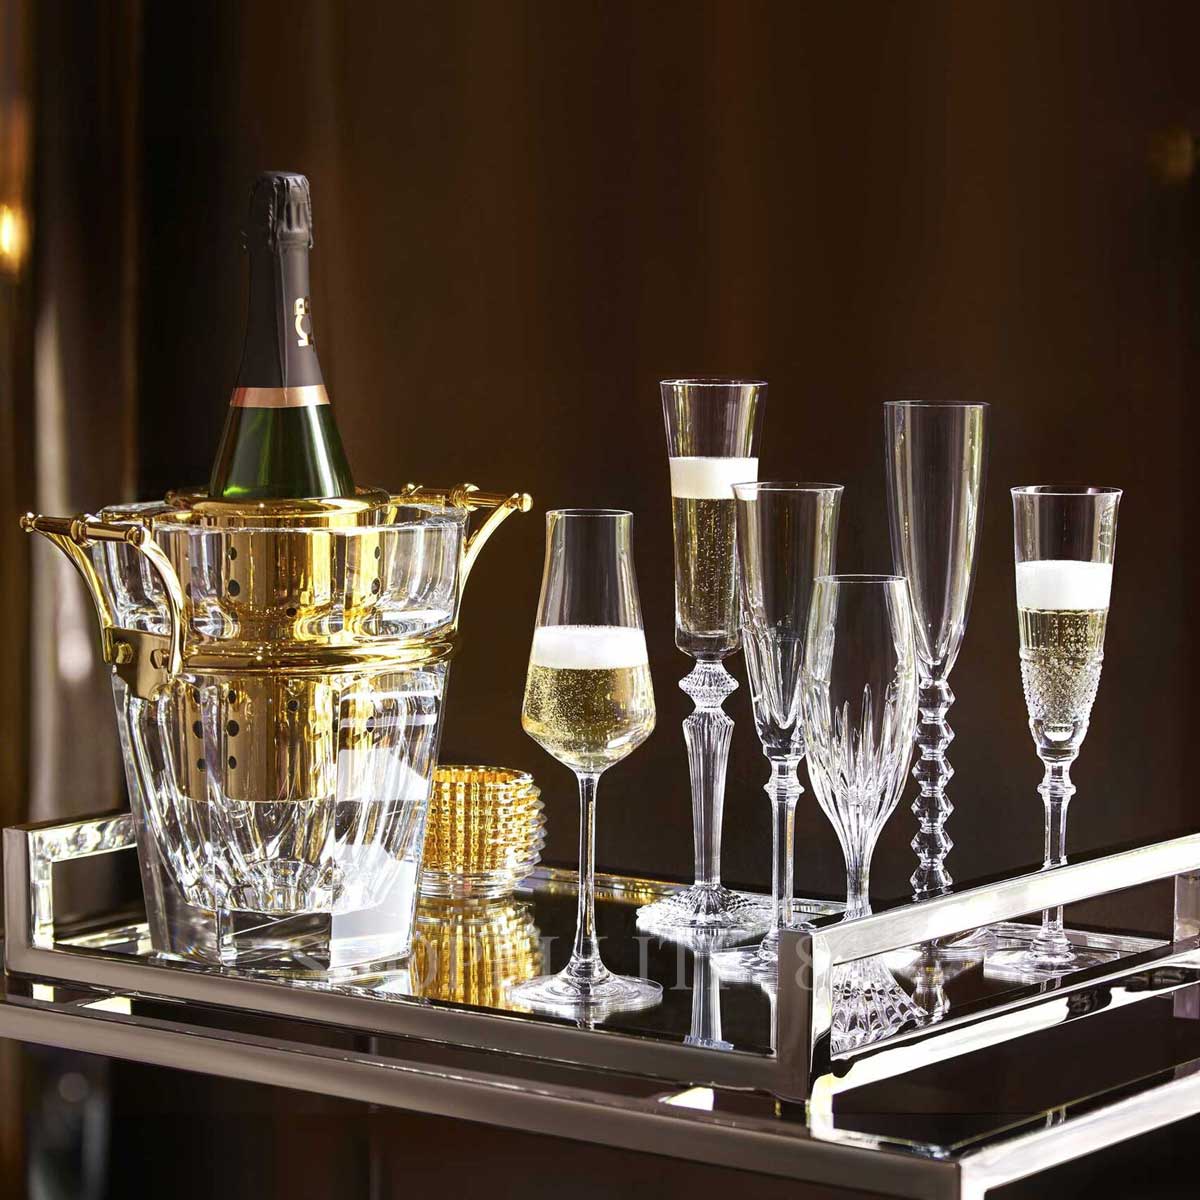 Baccarat Wine Therapy, Set of 6